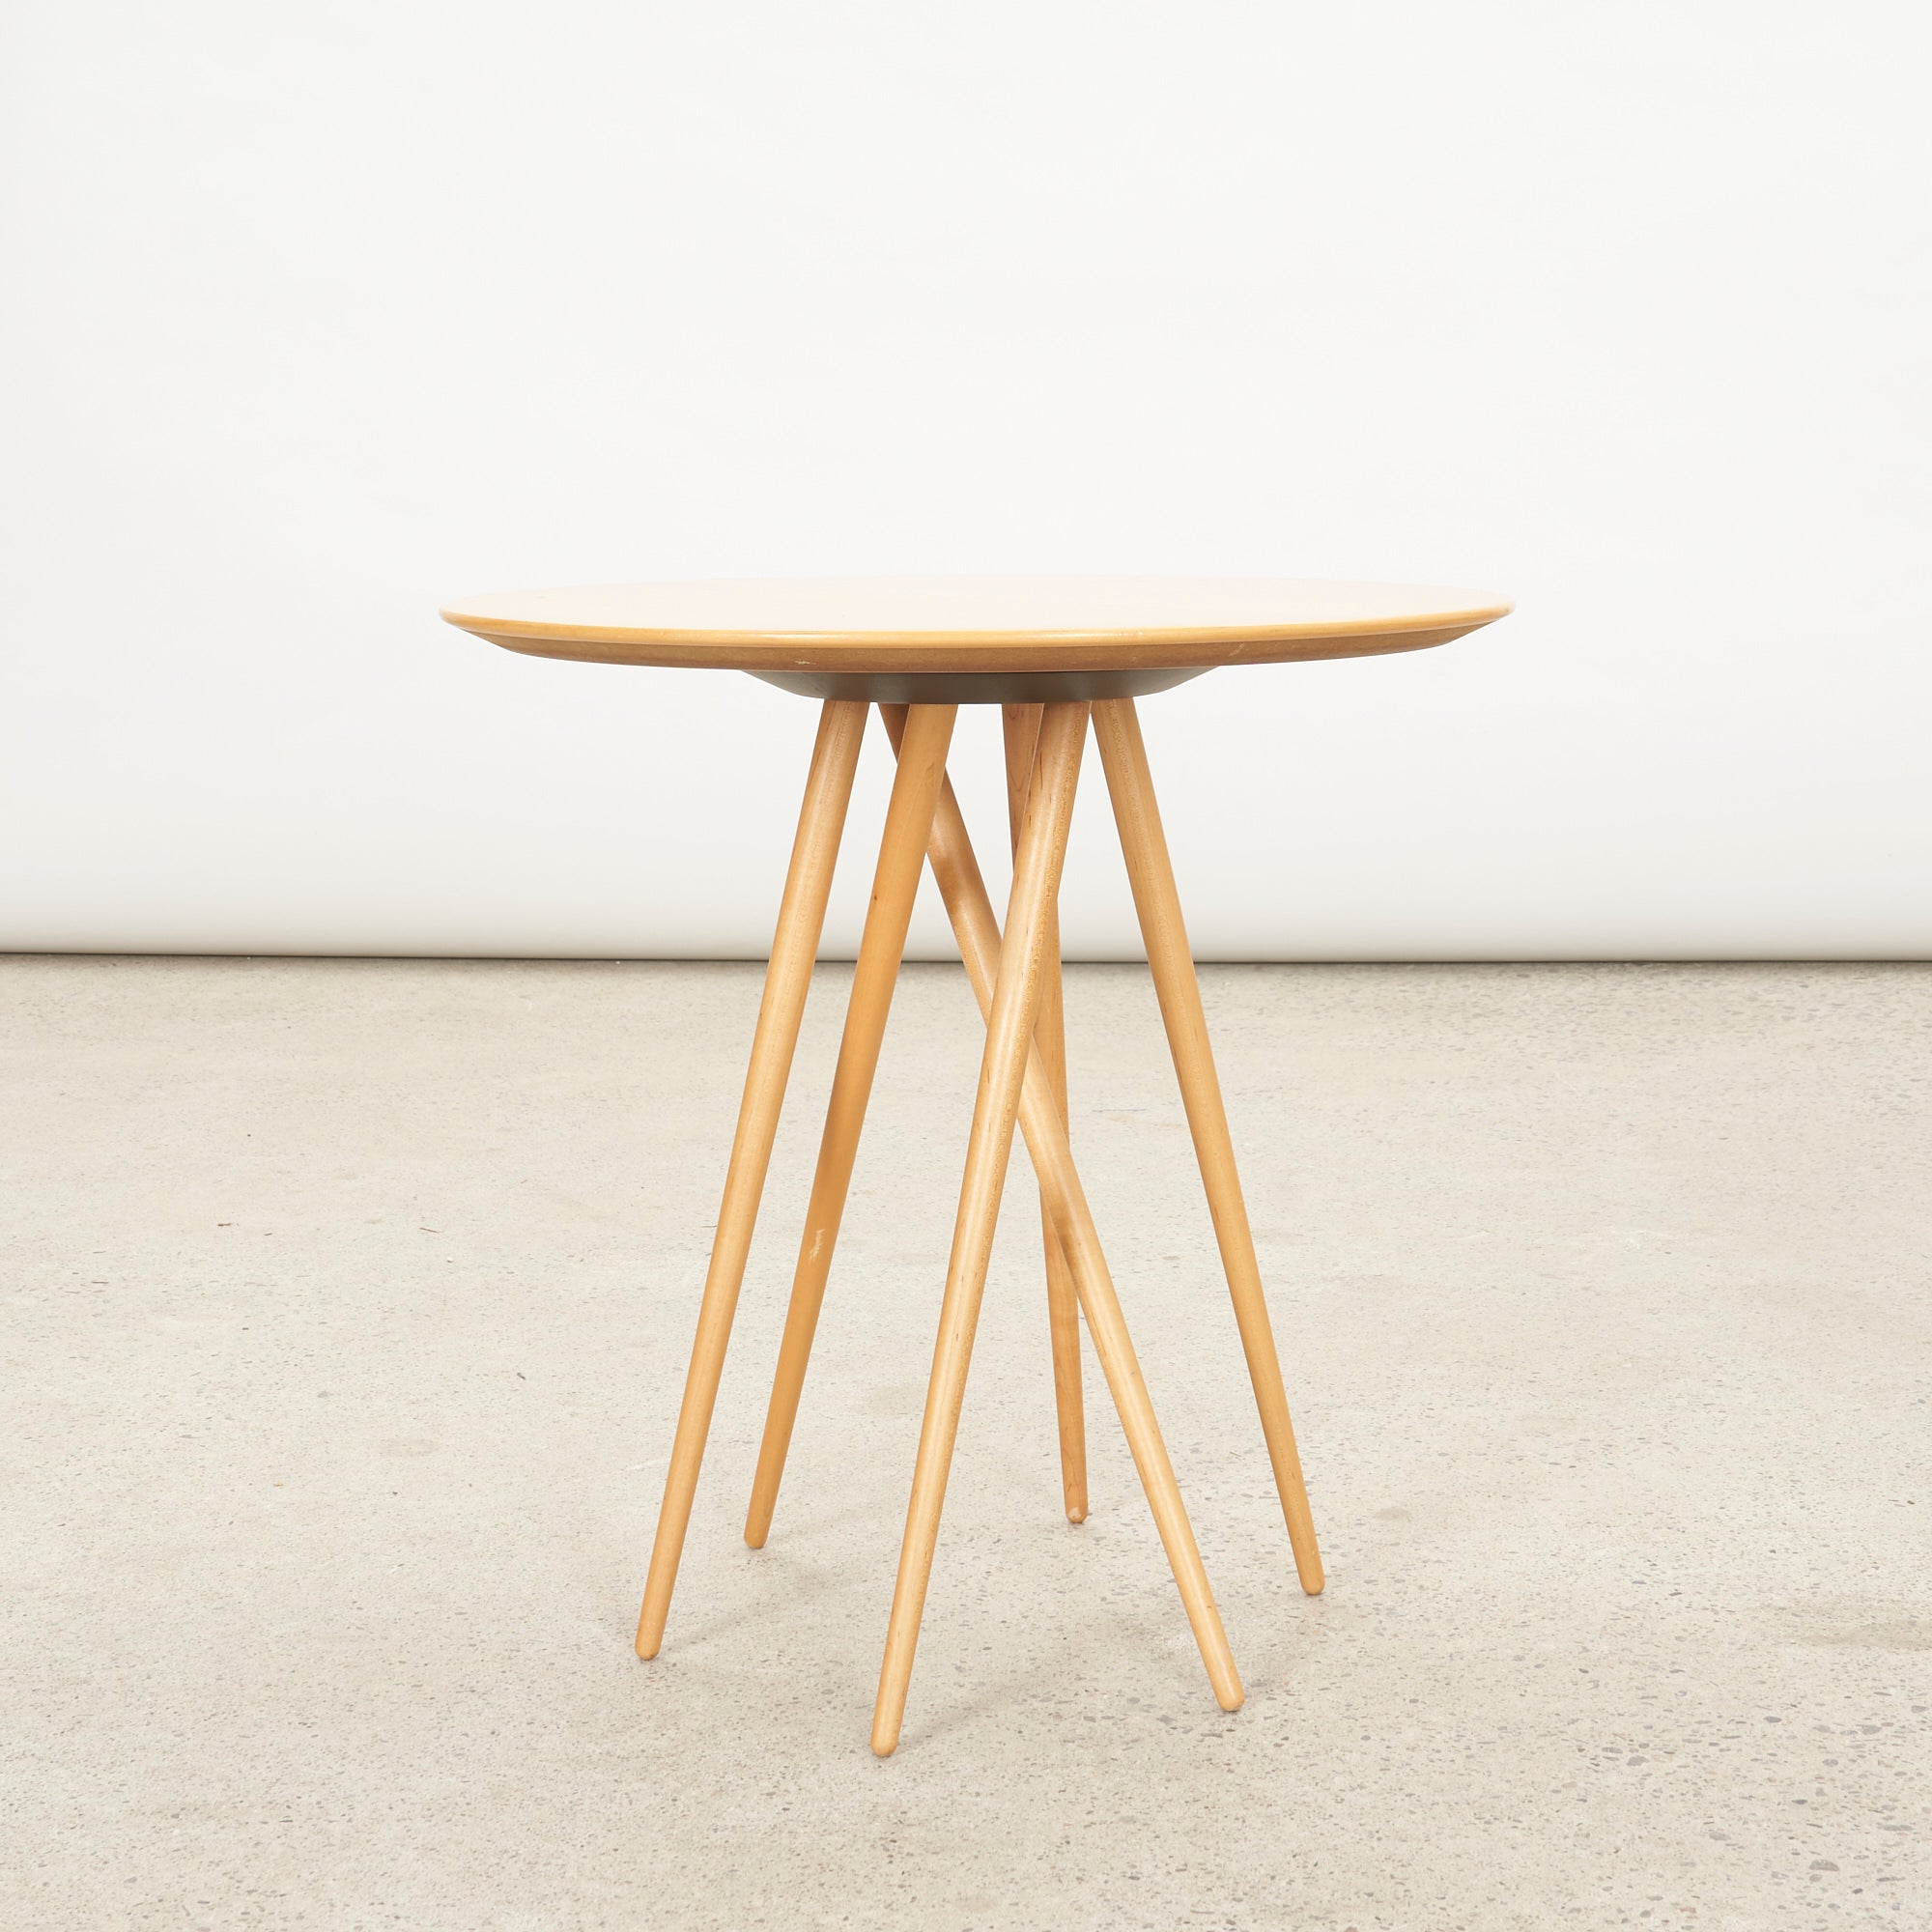 Toothpick Cactus Side Table by Lawrence Laske for Knoll